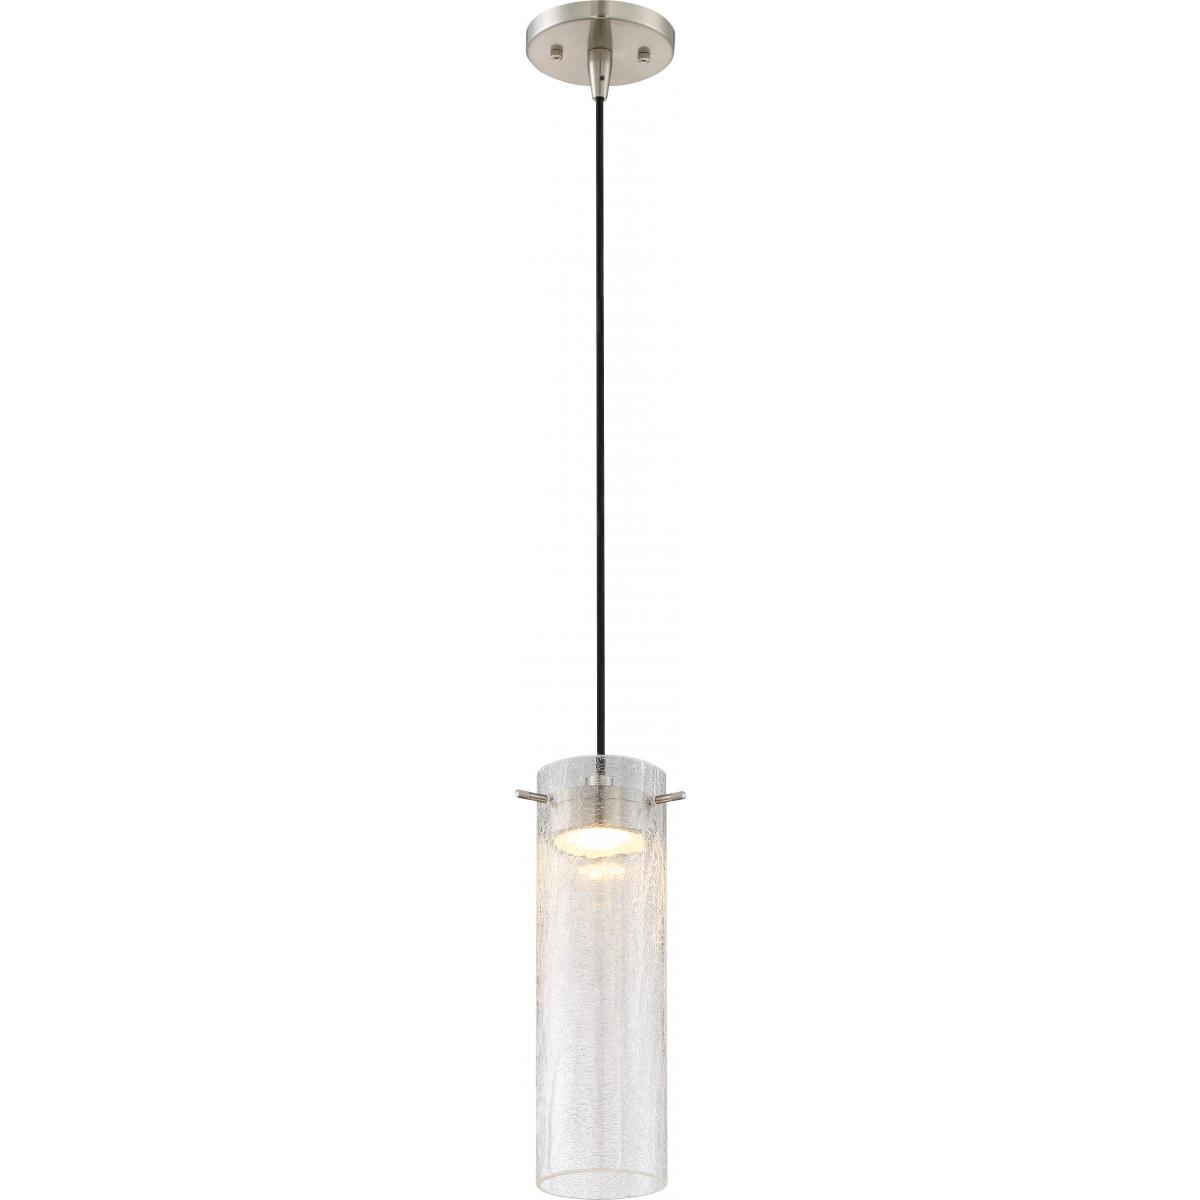 Nuvo 62-126 LED Mini Pendant Lights with Frosted Glass in Hazel Bronze Finish 